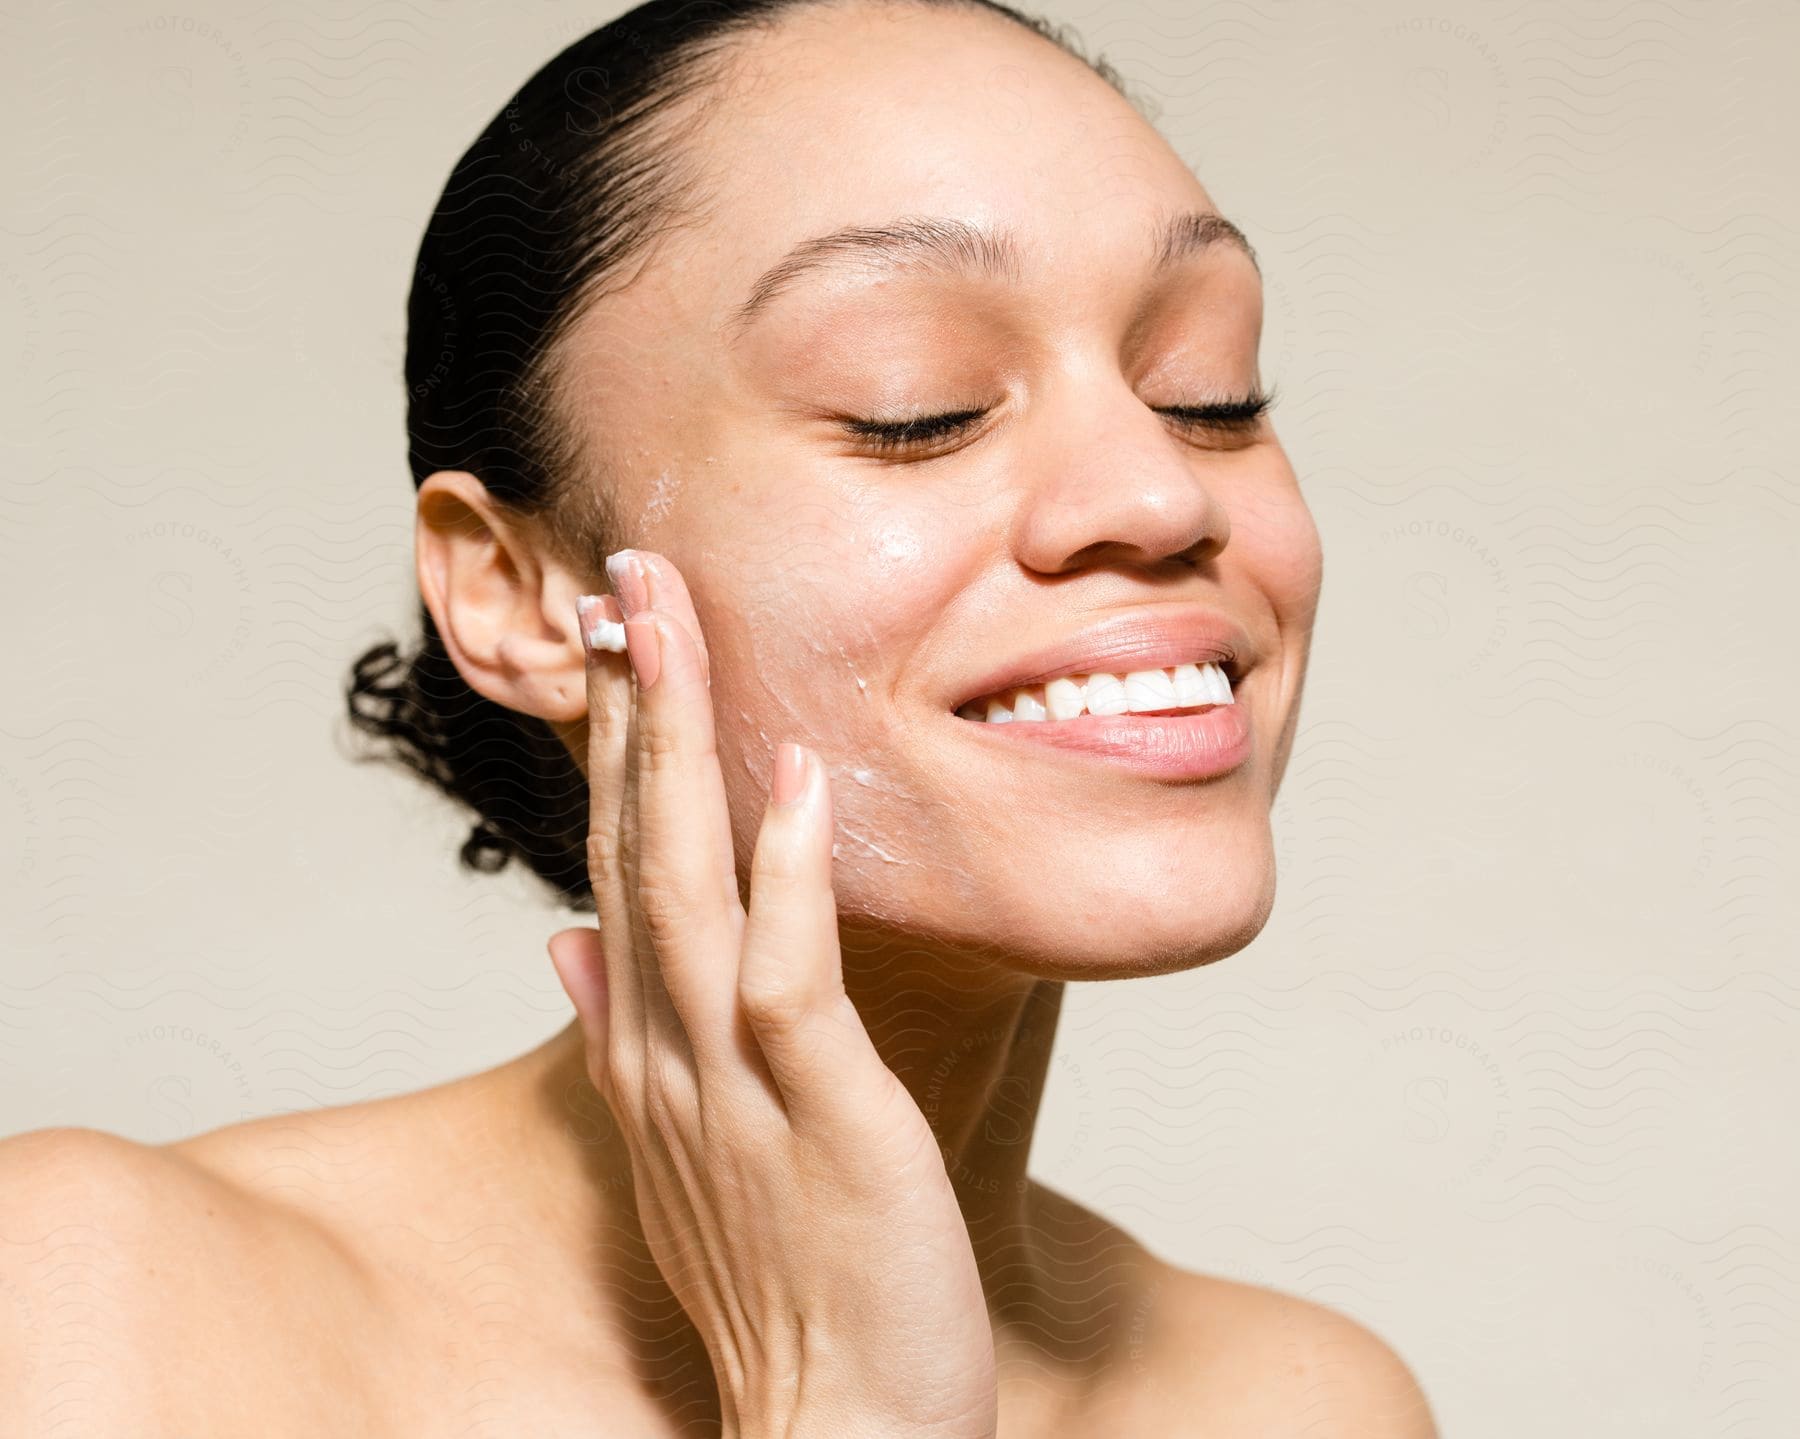 A woman smiling while spreading cream on her cheek